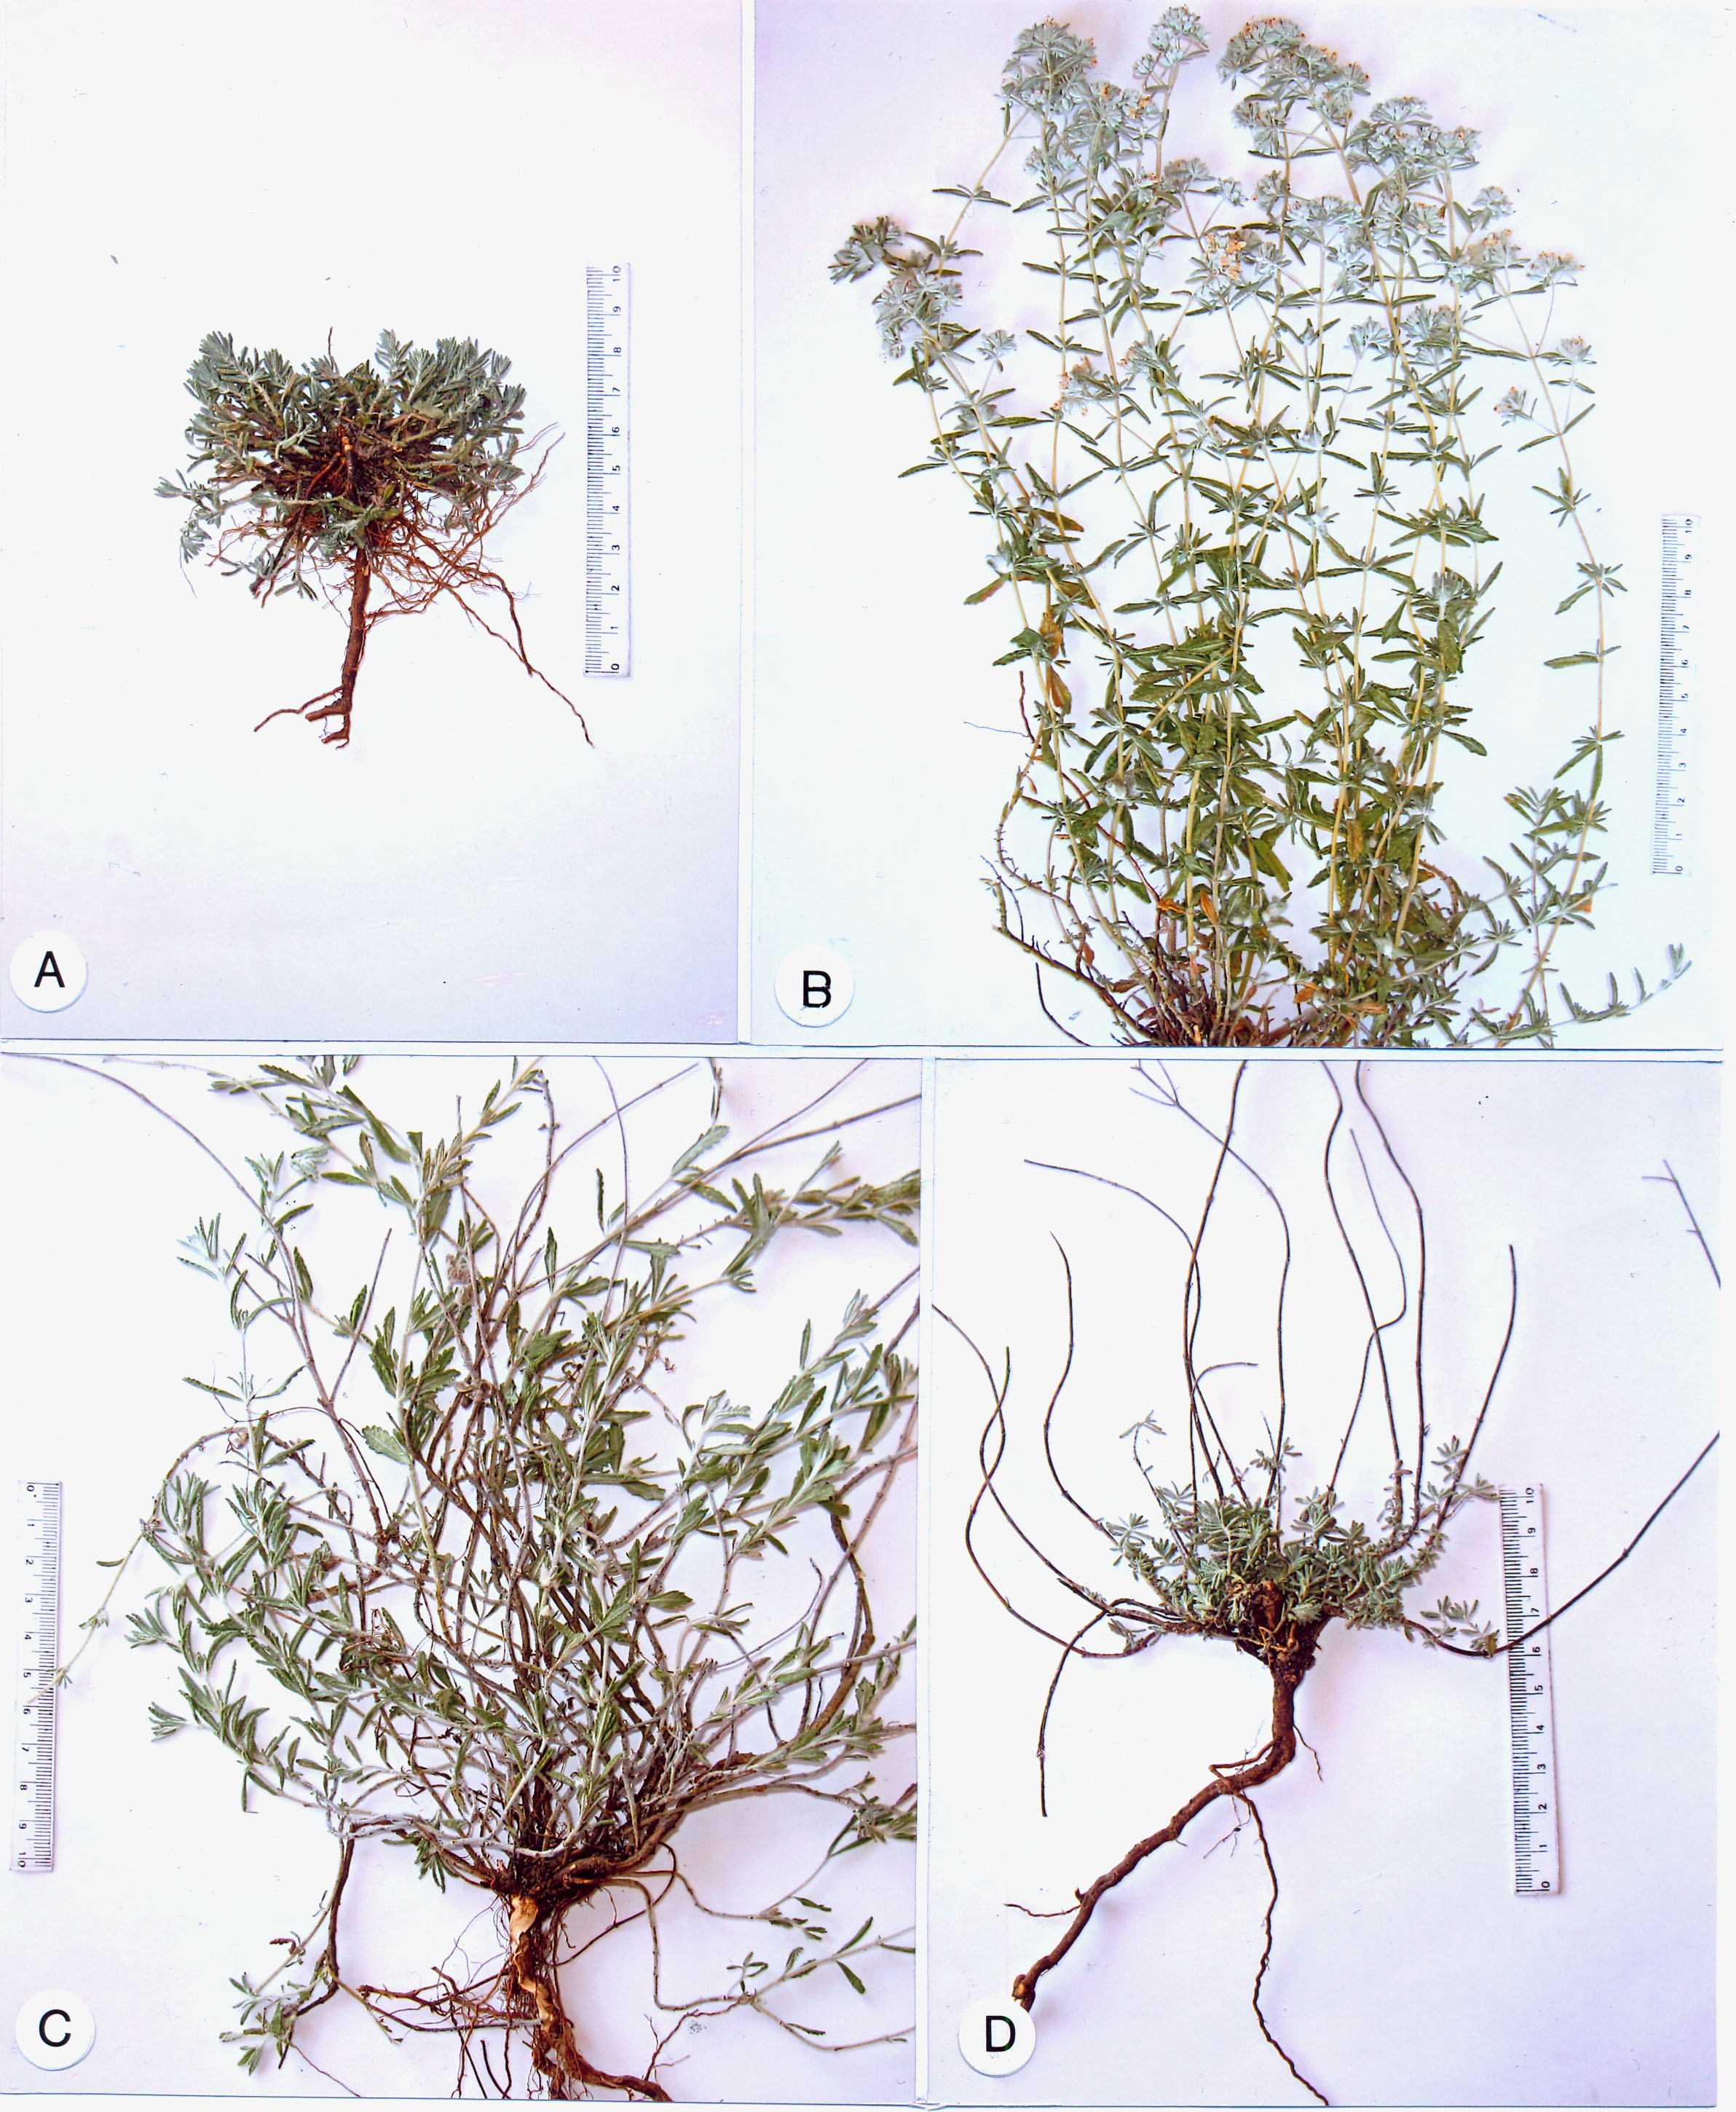 Fig. 1. The annual biological cycle of Teucrium polium at various seasonal phases (herbarium material): A – winter (late January); B – spring/summer (late May/early July); C – summer (late July/middle August); D – autumn (late November).